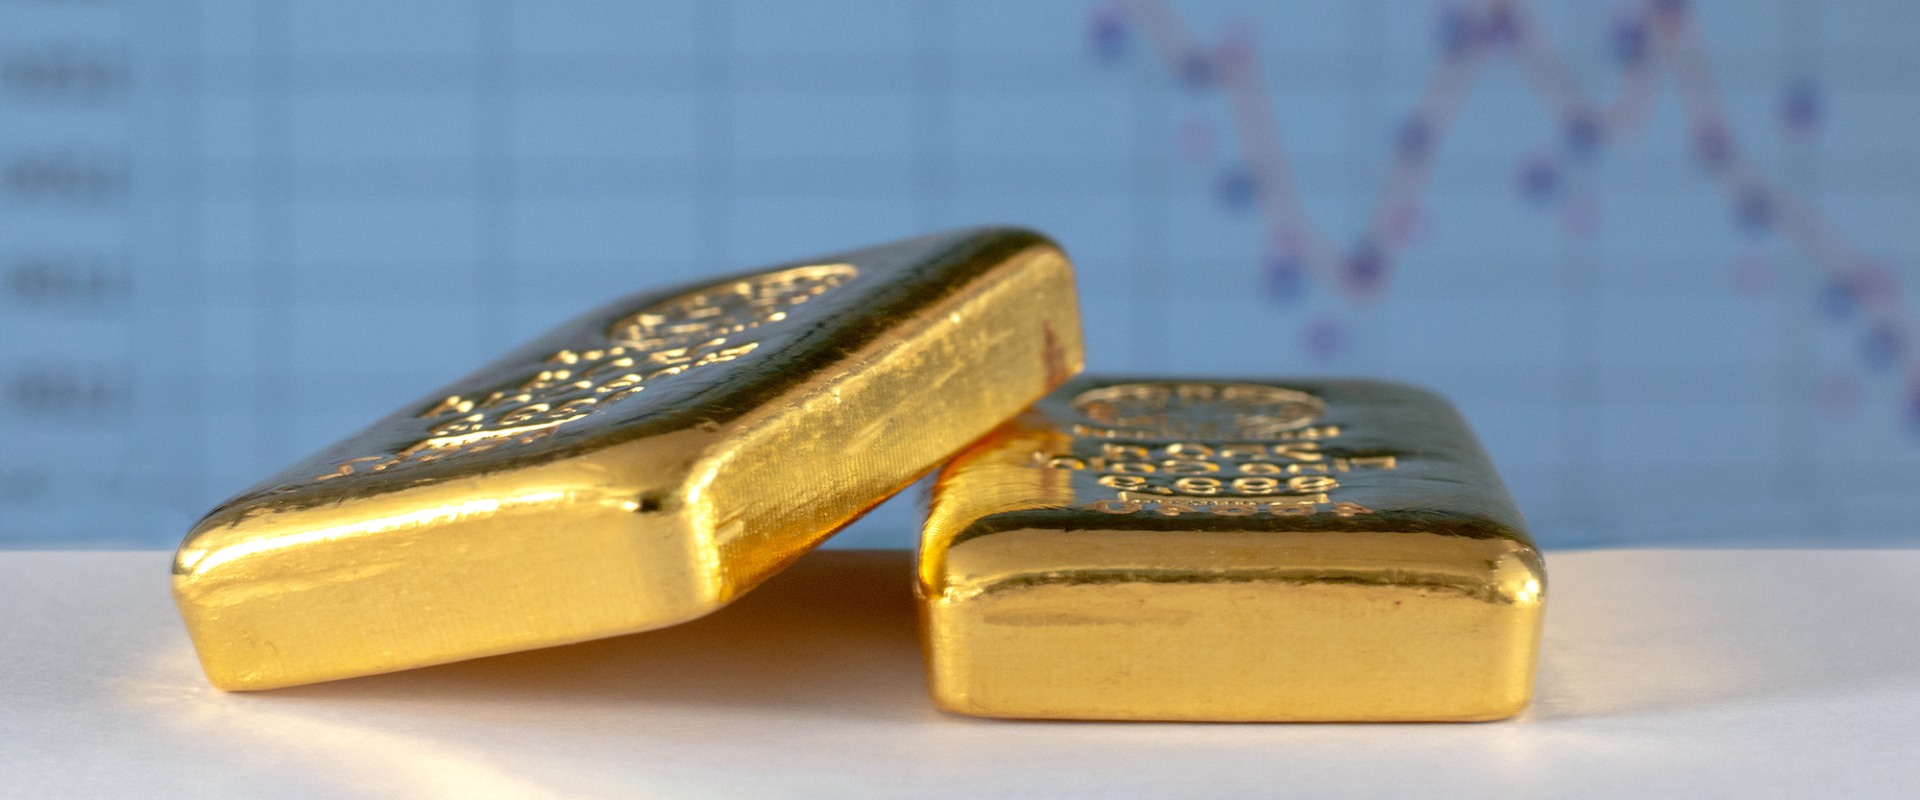 Is gold better than equity?